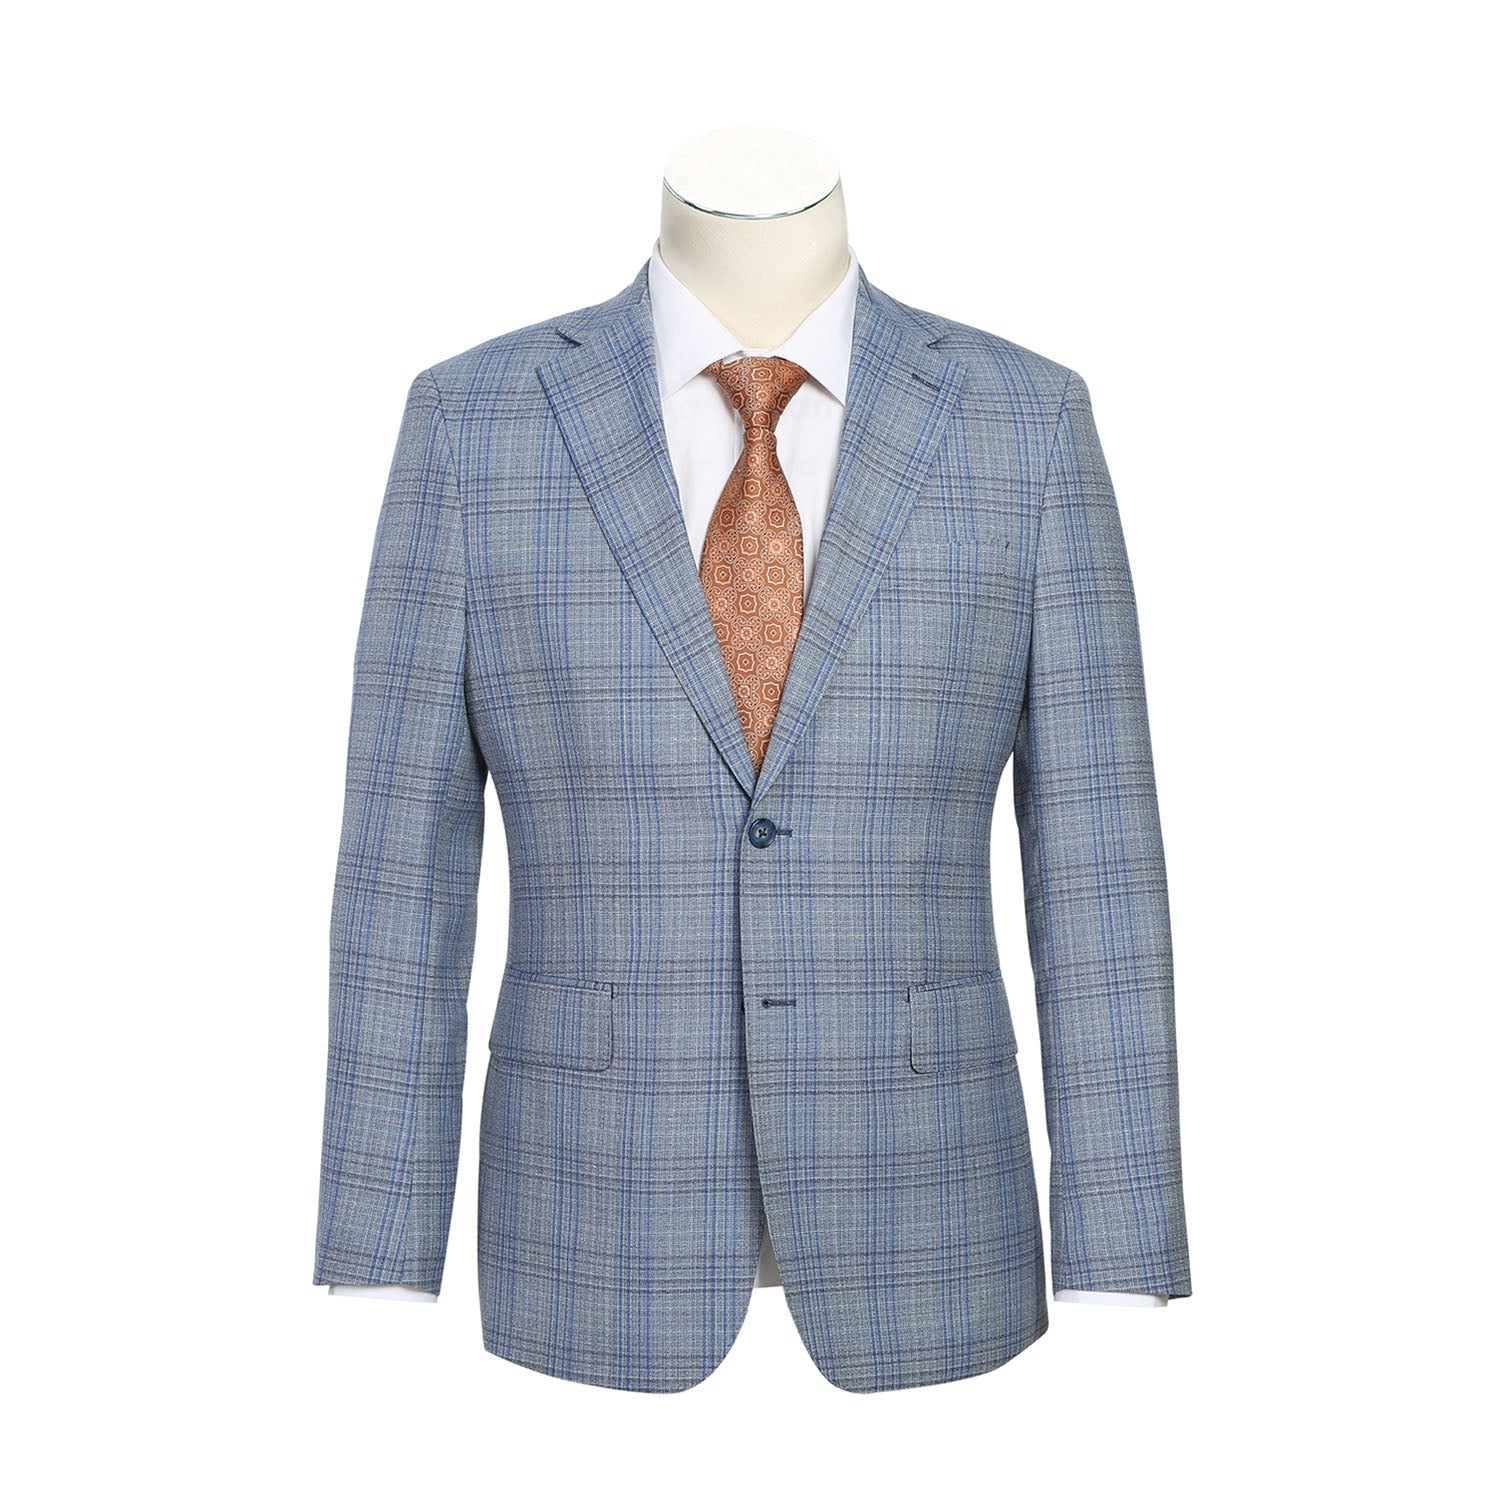 English Laundry Light Gray with Blue Check Wool Suit 1